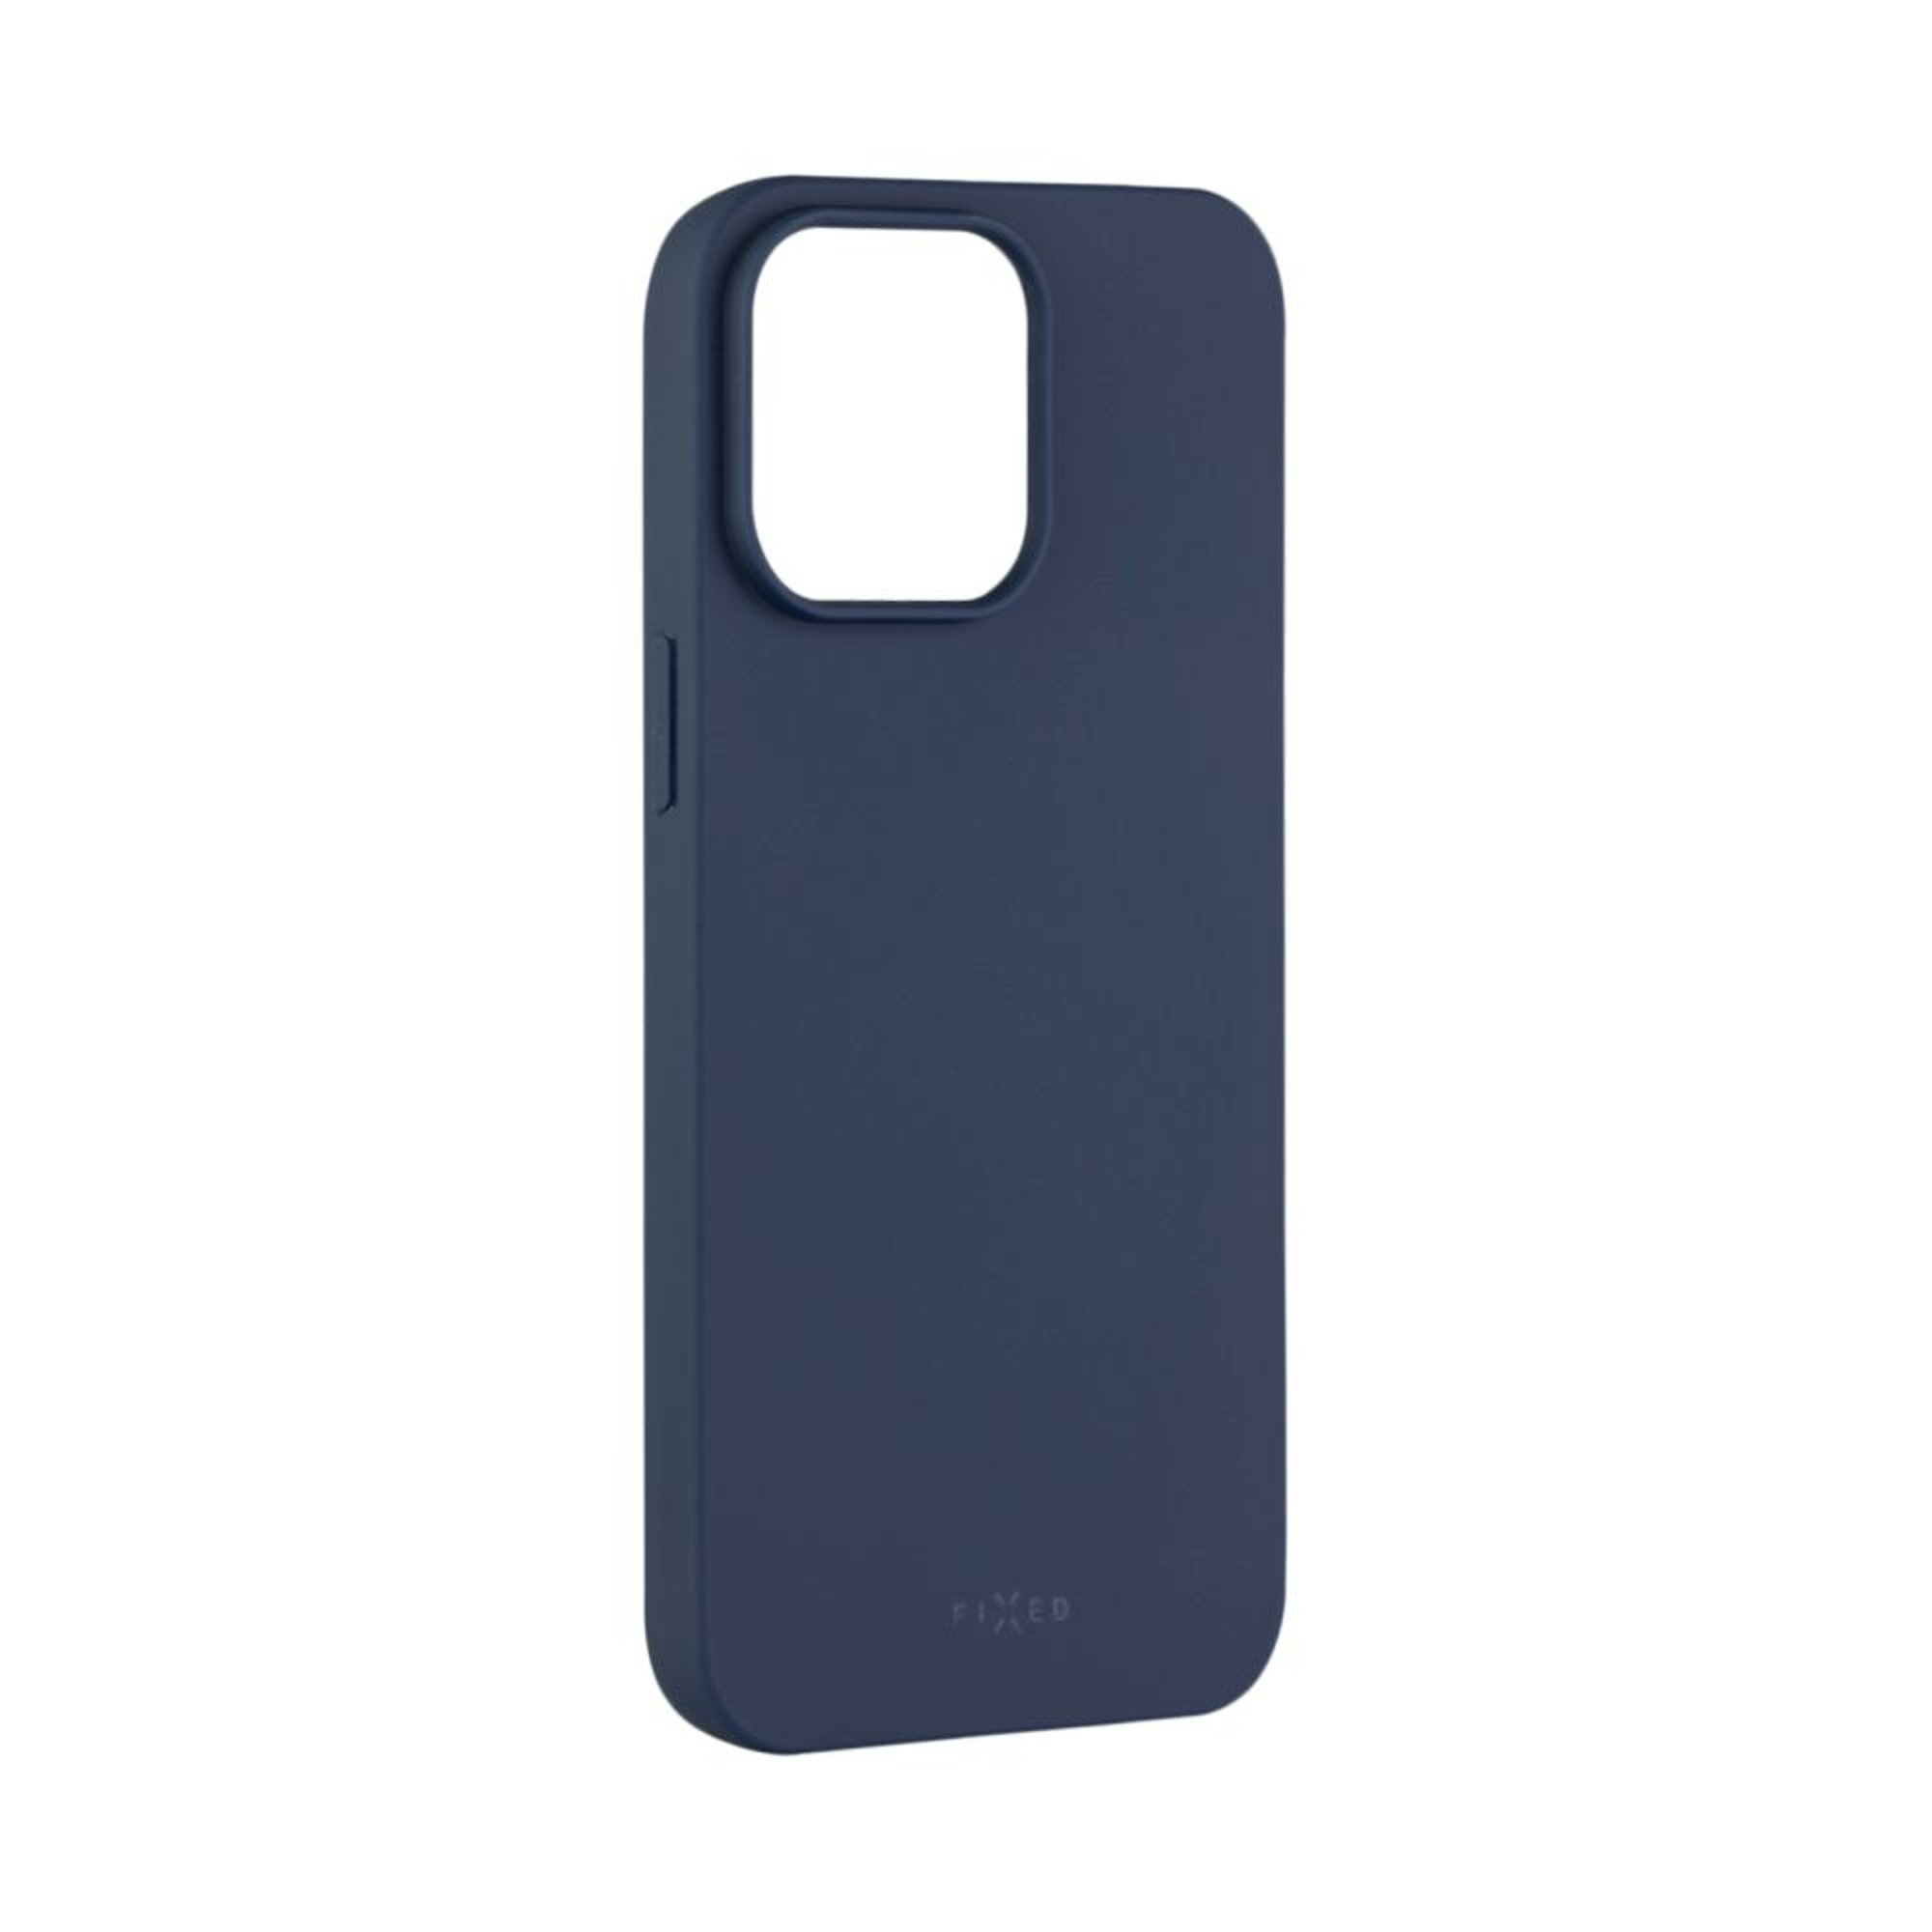 FIXST-931-BL, Backcover, Max, Blau FIXED 14 Pro Apple, iPhone